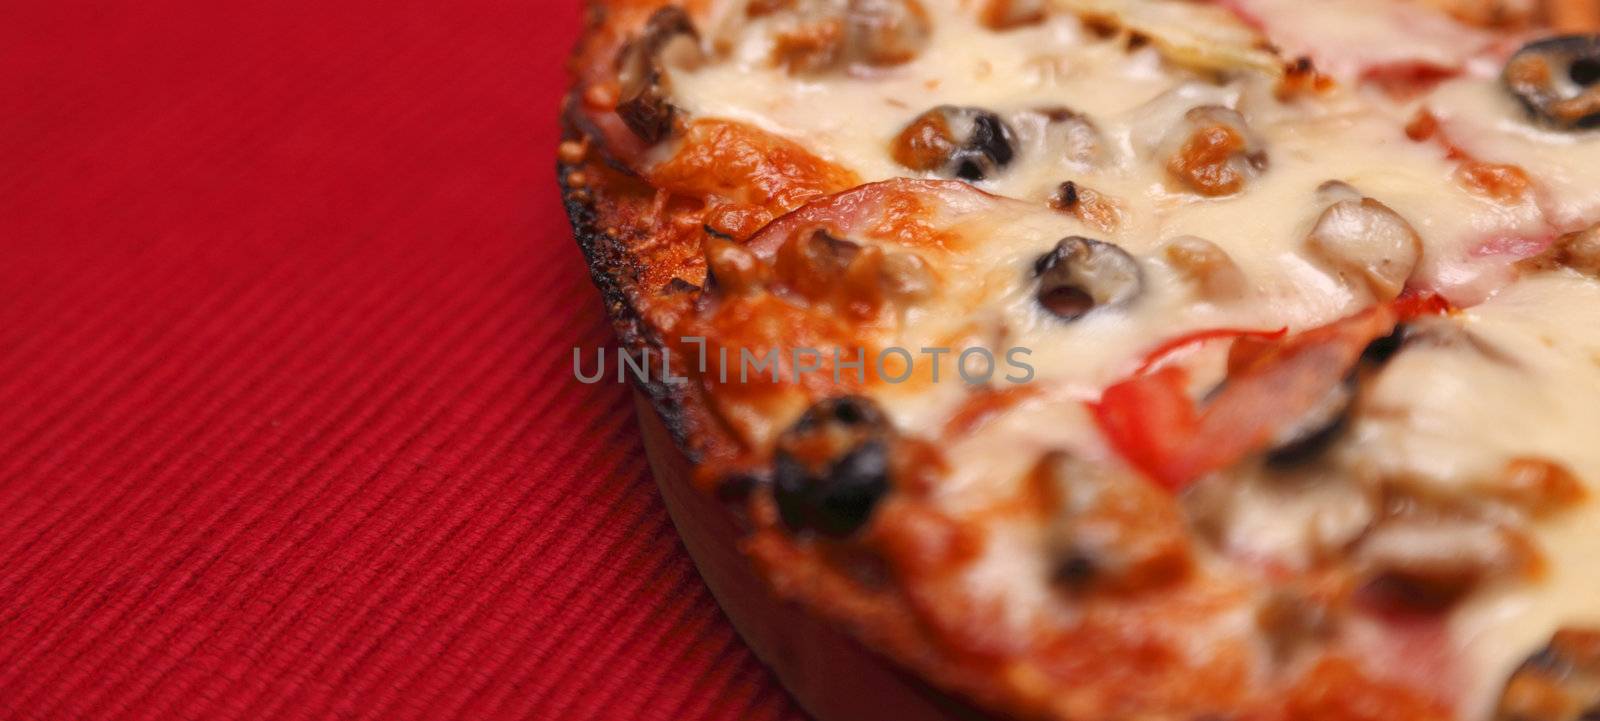 Close-up image of a tasty pizza on a red table cloth.